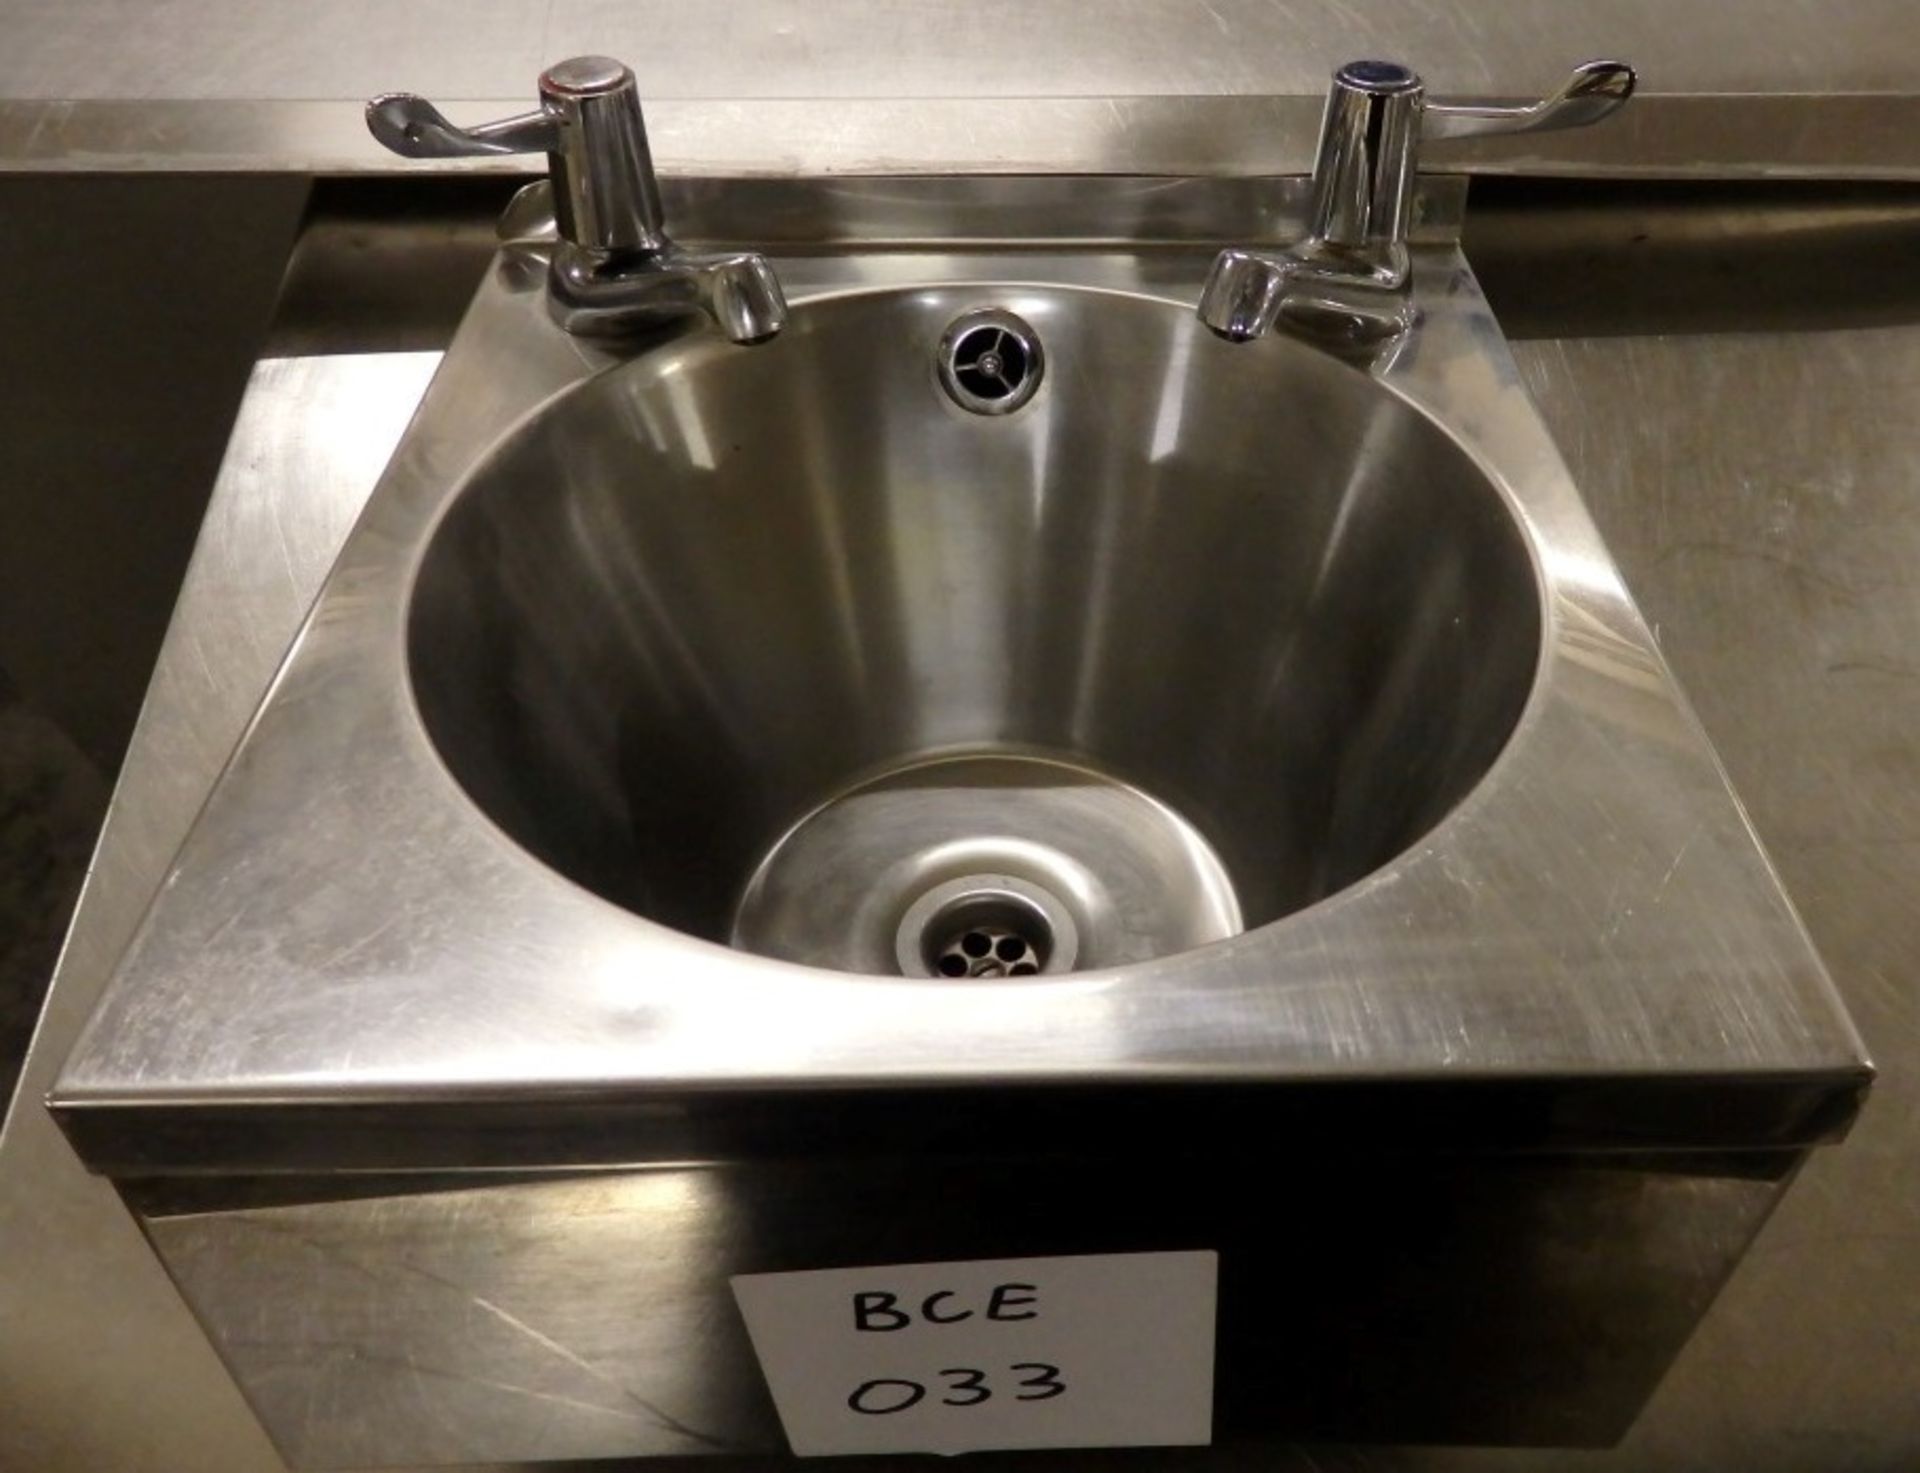 1 x Stainless Steel Wall Mounted Sink Basin - H30 x W34 x D35cm - Suitable For Commercial Kitchens -